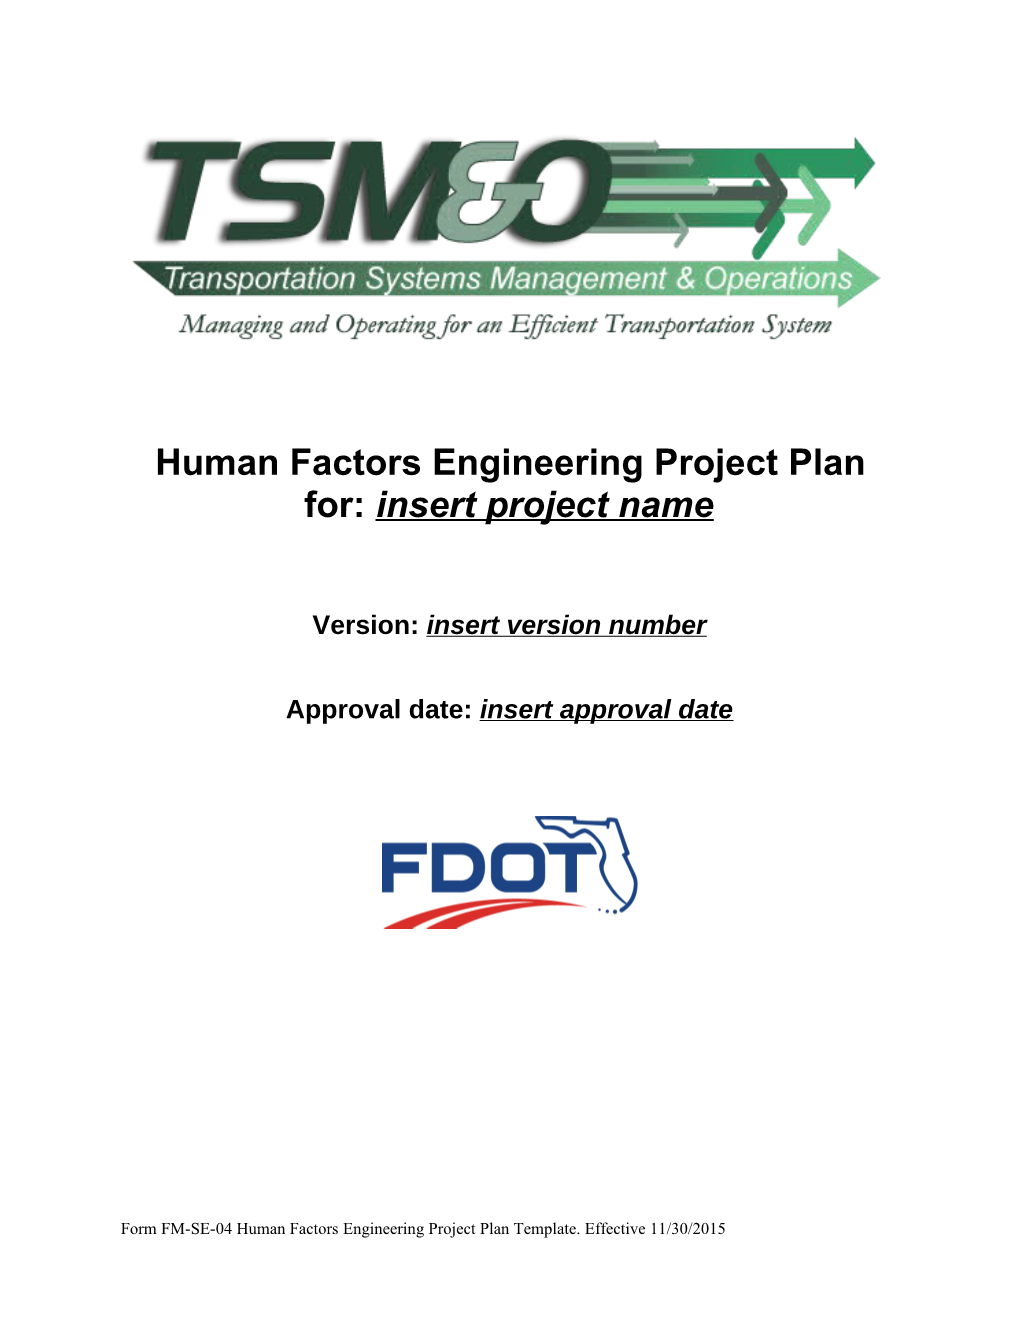 Human Factors Engineering Project Plan For:Insert Project Name